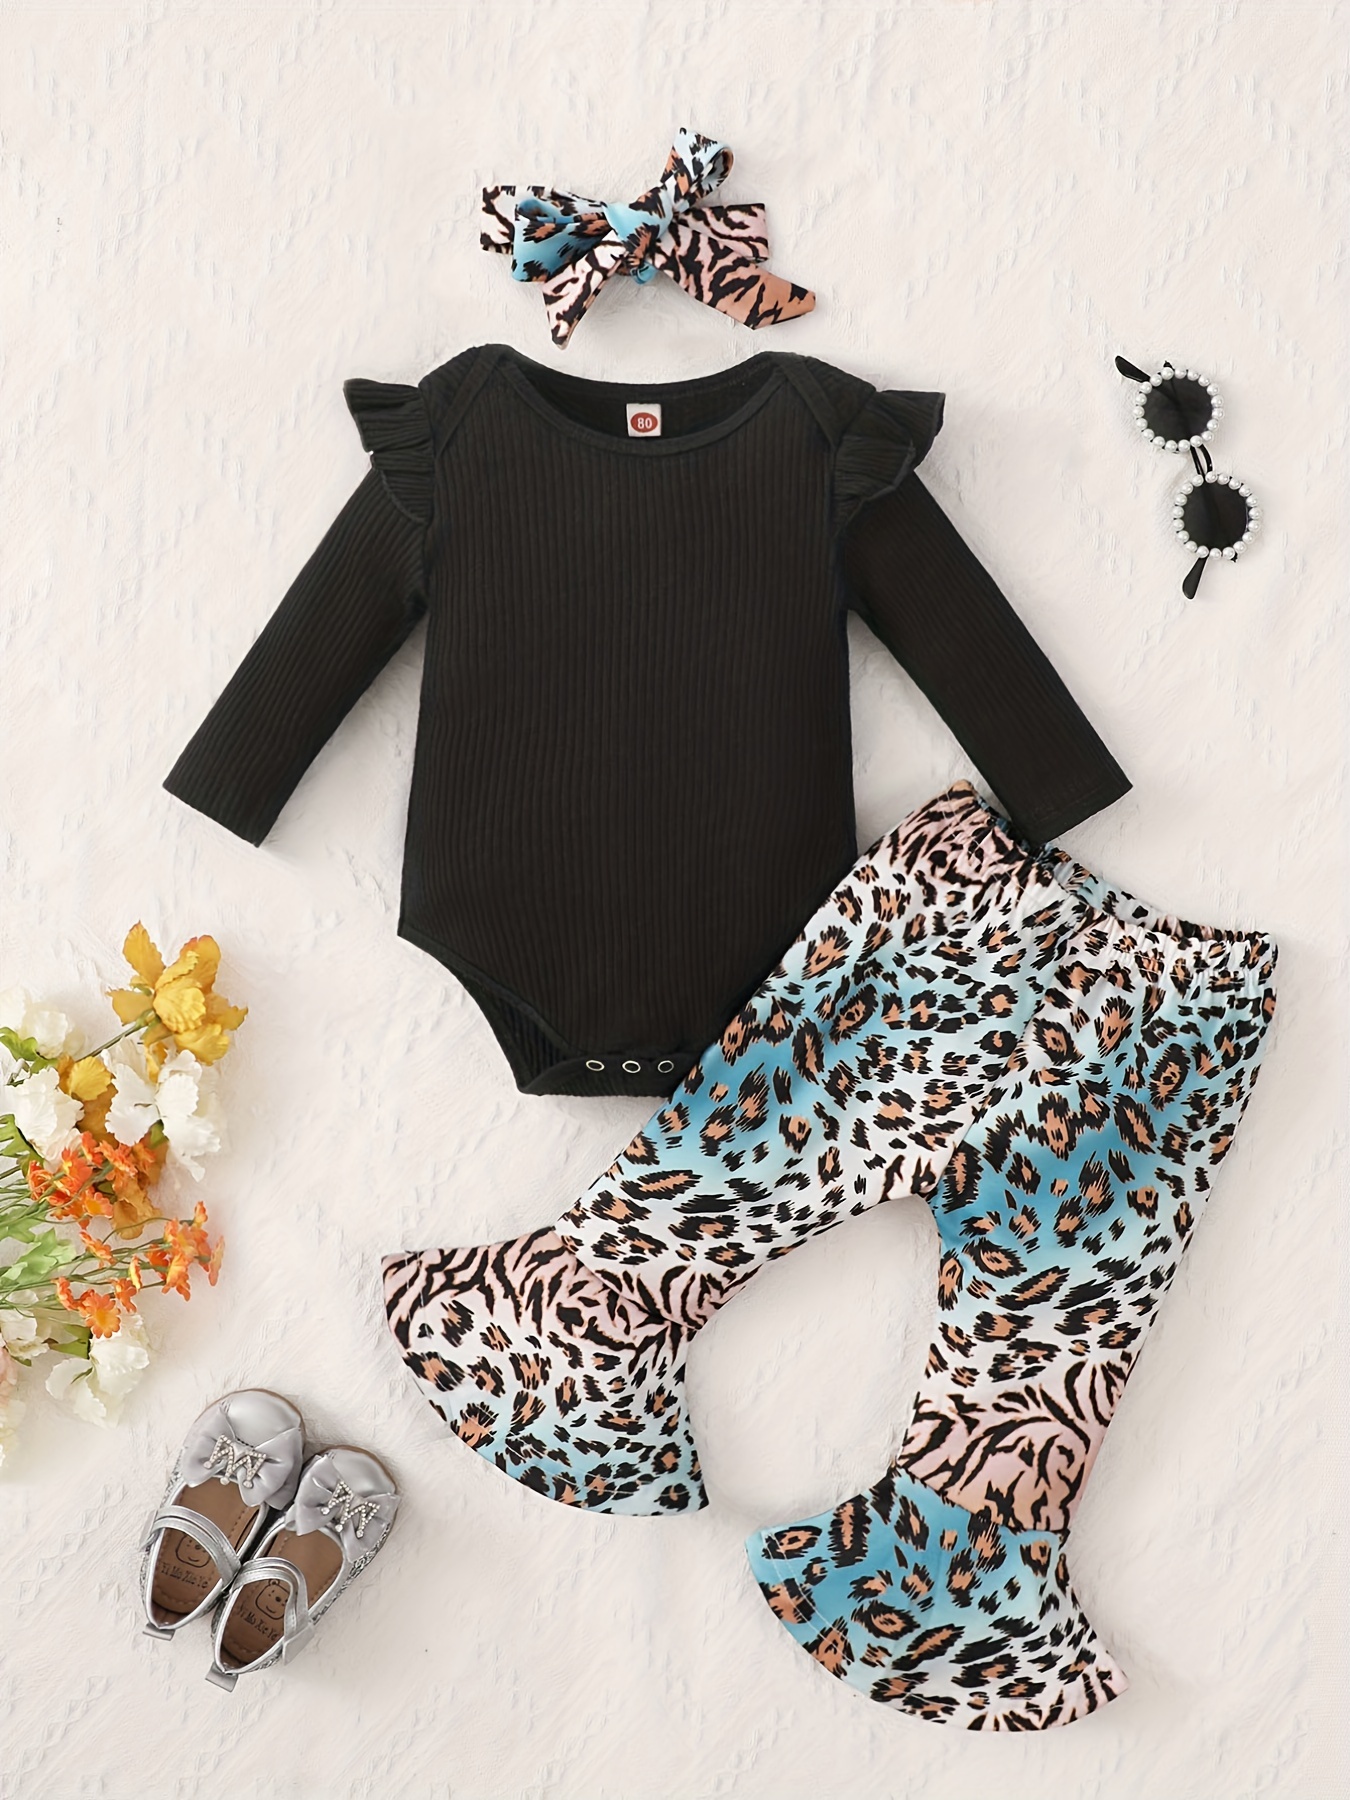 Newborn Baby Girl Clothes Set Fashion Leopard Pants Pink Letter Print Tops  Headband 3Pcs Autumn Toddler Infant Clothing Outfits